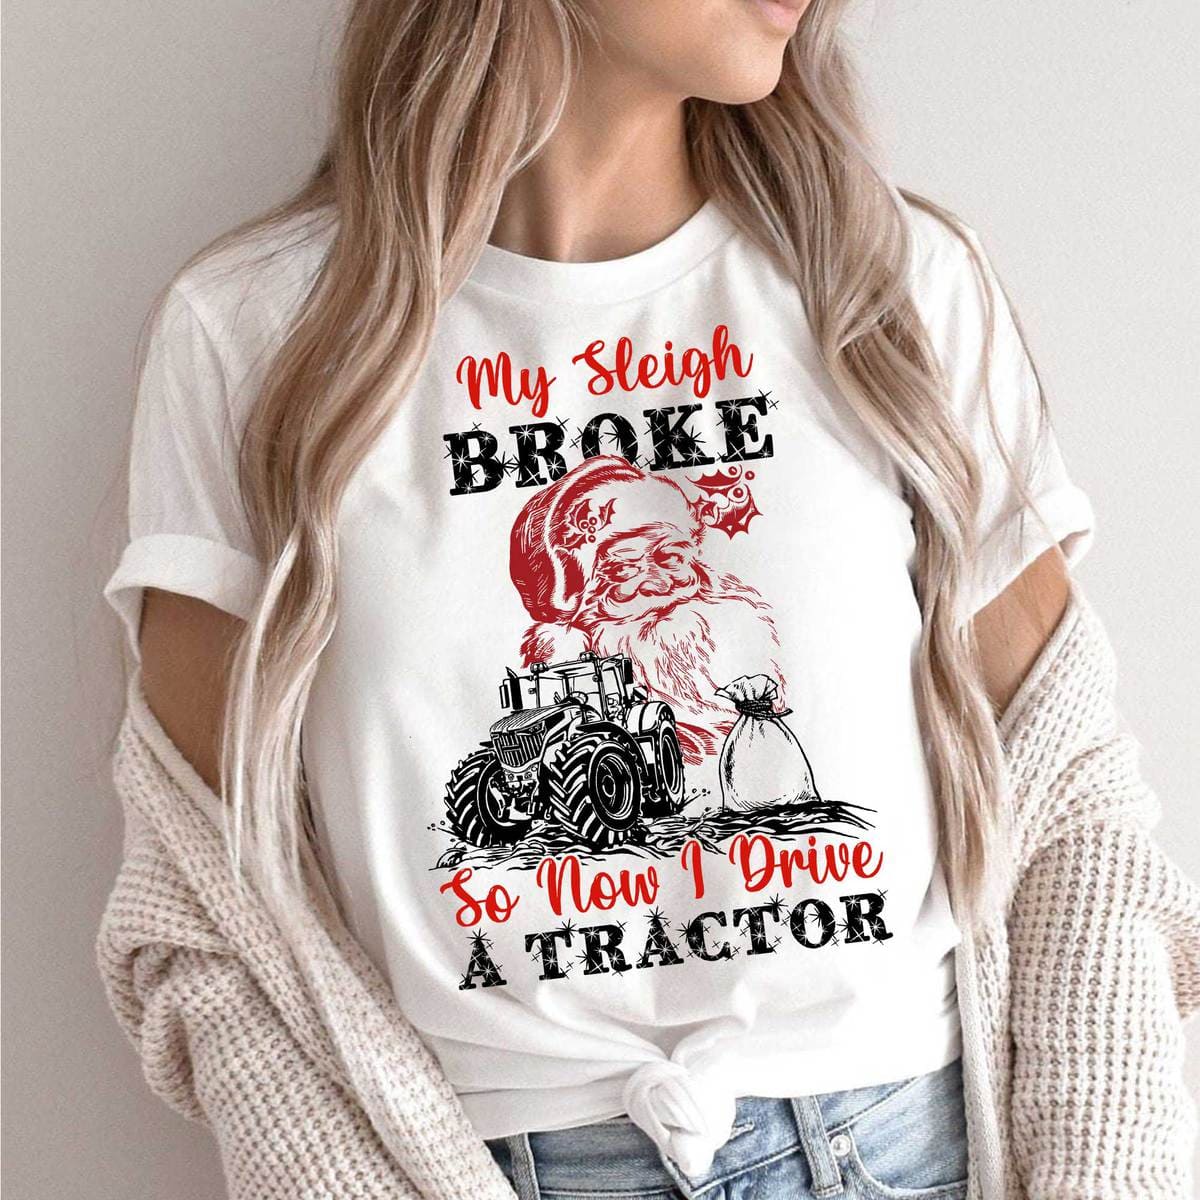 Santa Claus Tractor - My sleigh broke so now i drive a tractor